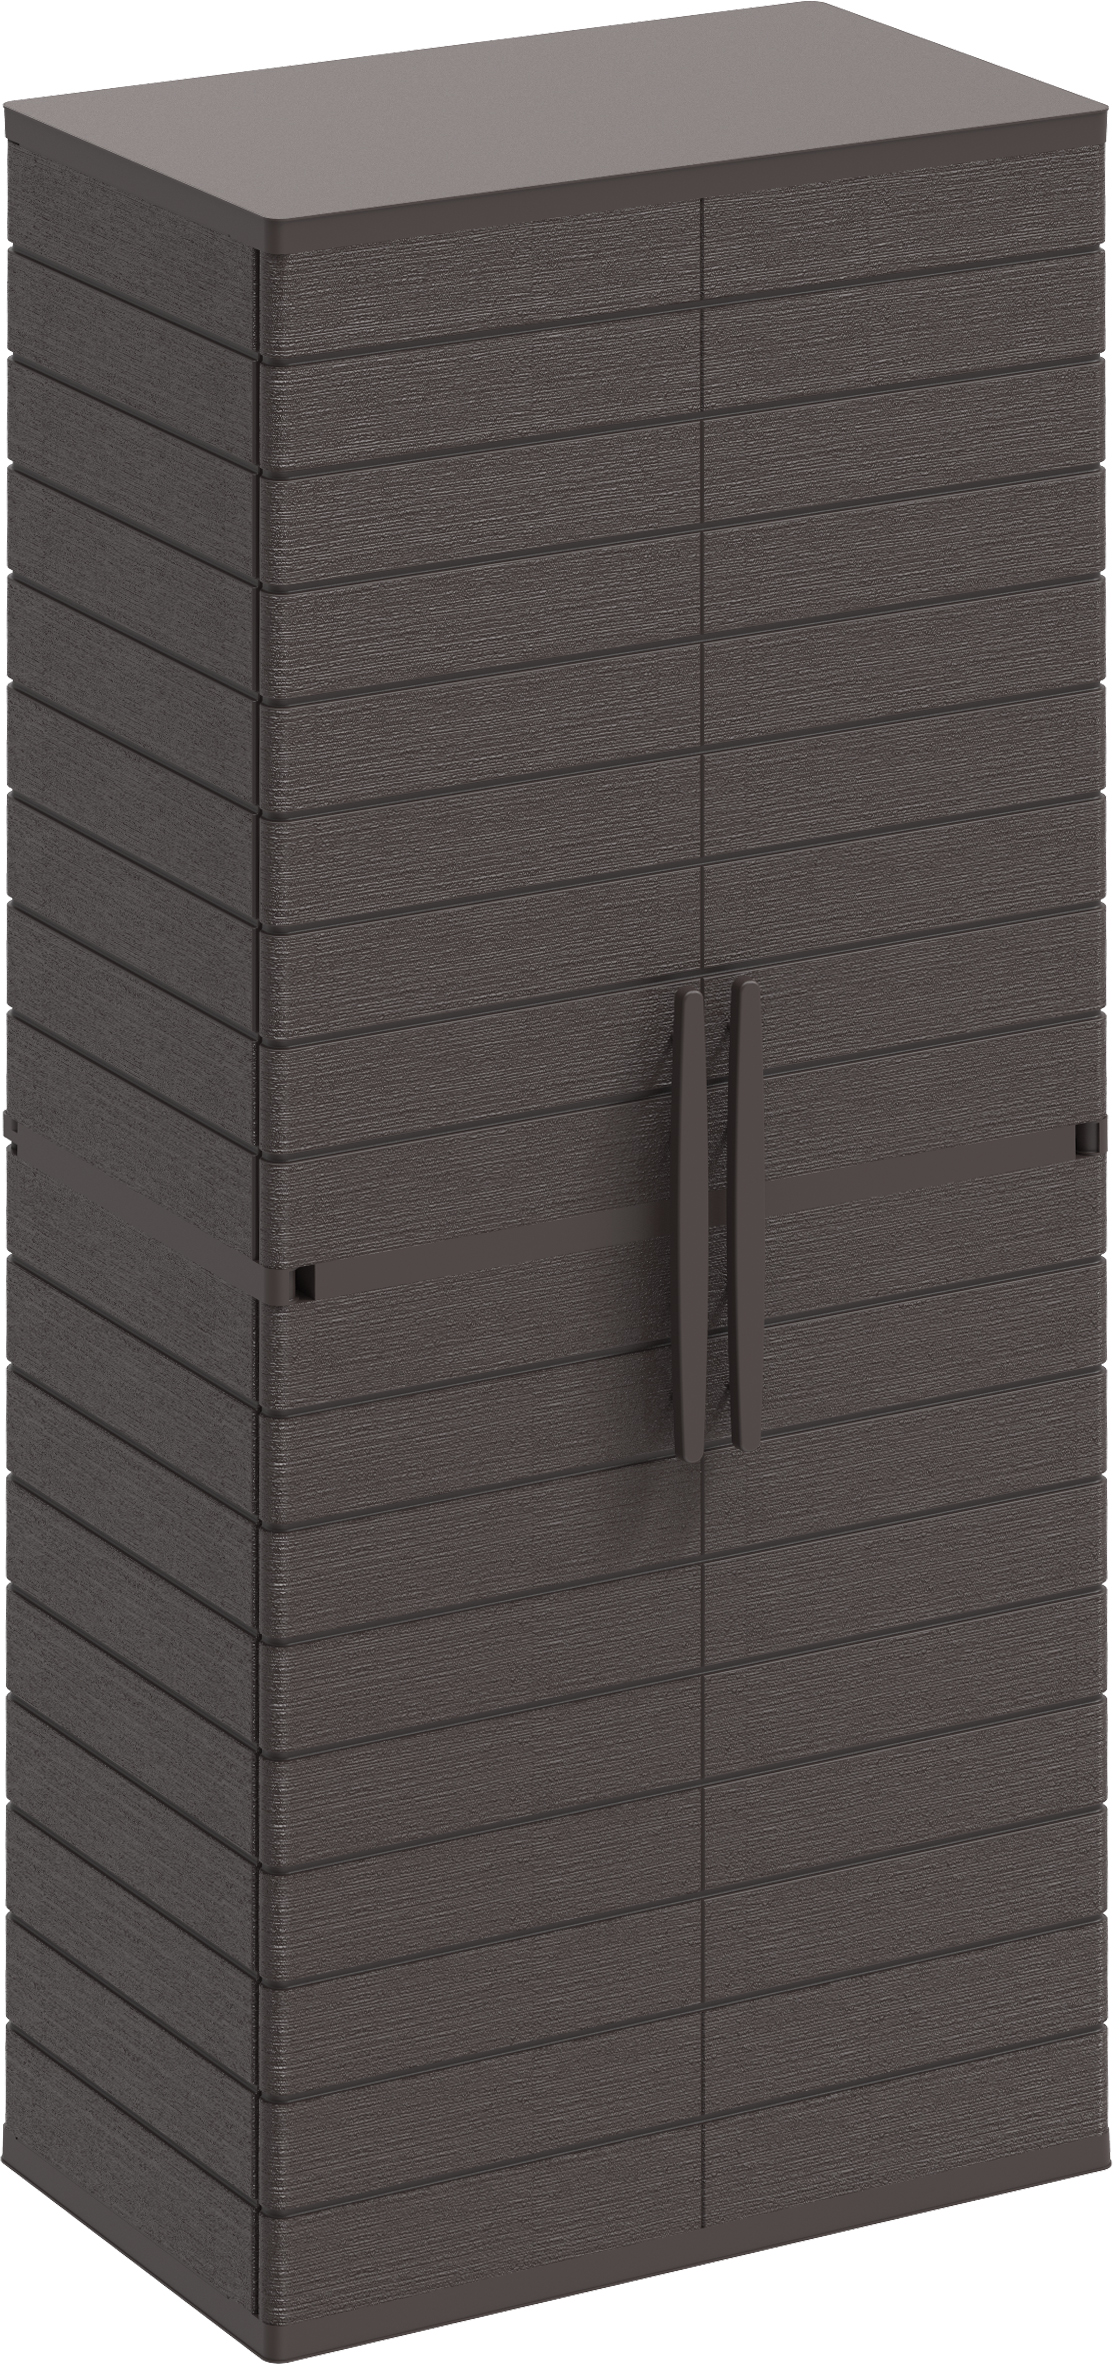 Vertical-Cabinet-Tall-1-Isometric-View.4406